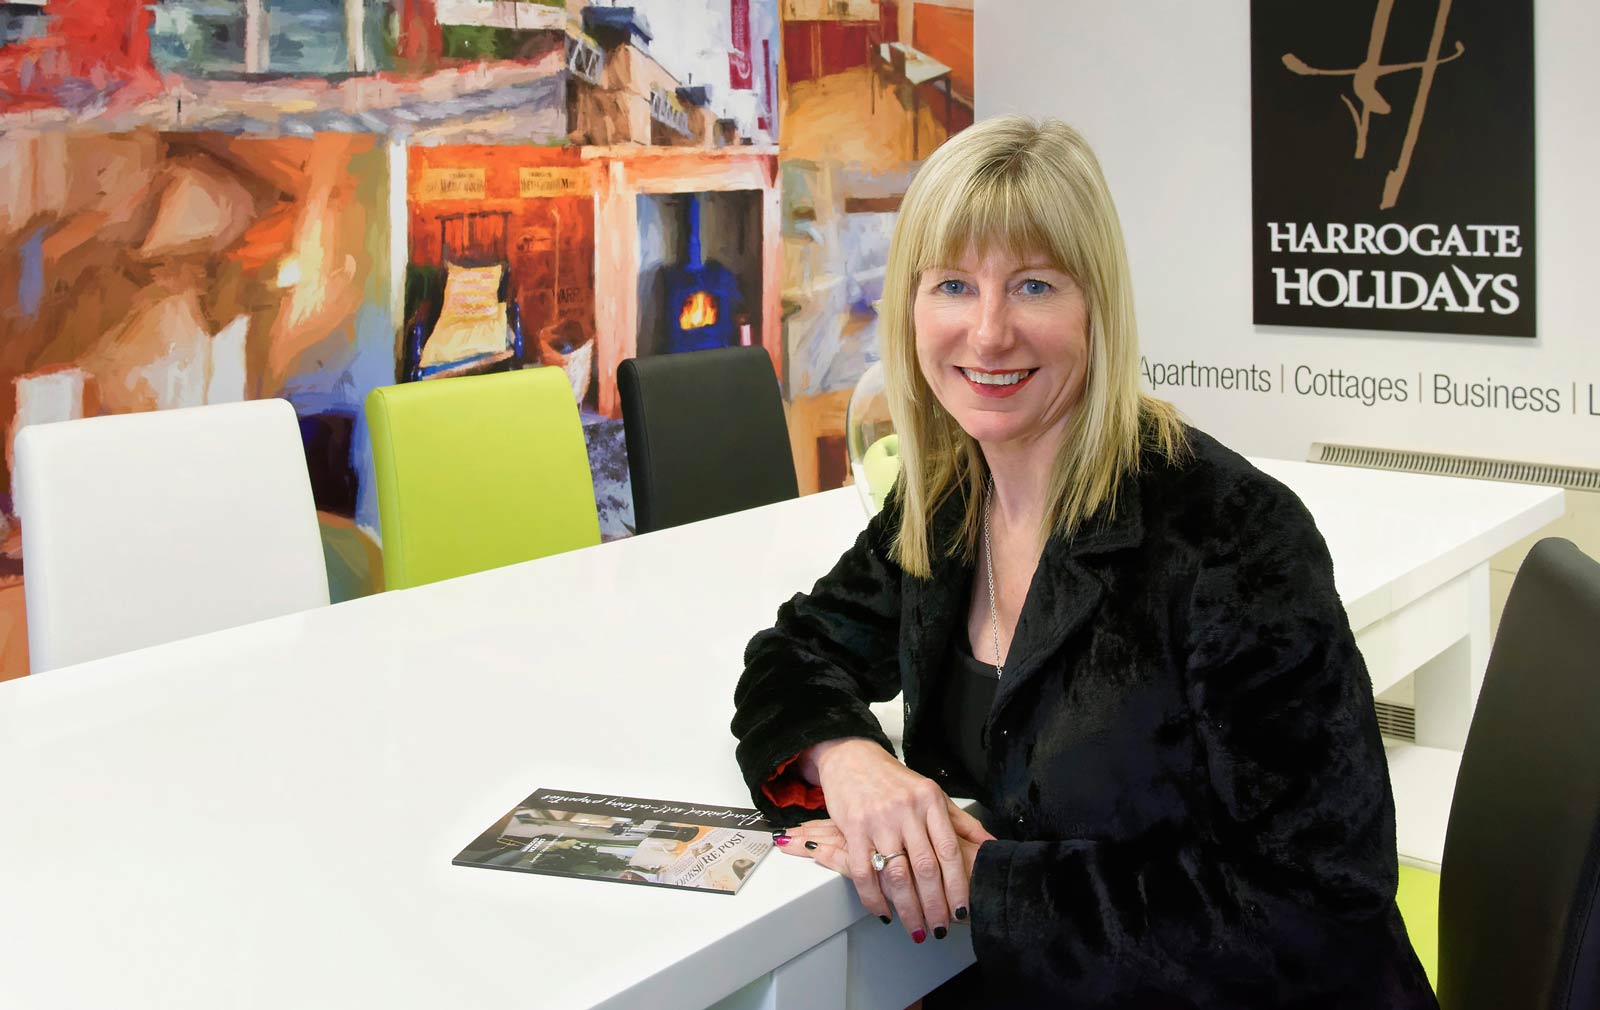 Alison Hartwell, Managing Director from Harrogate Holidays